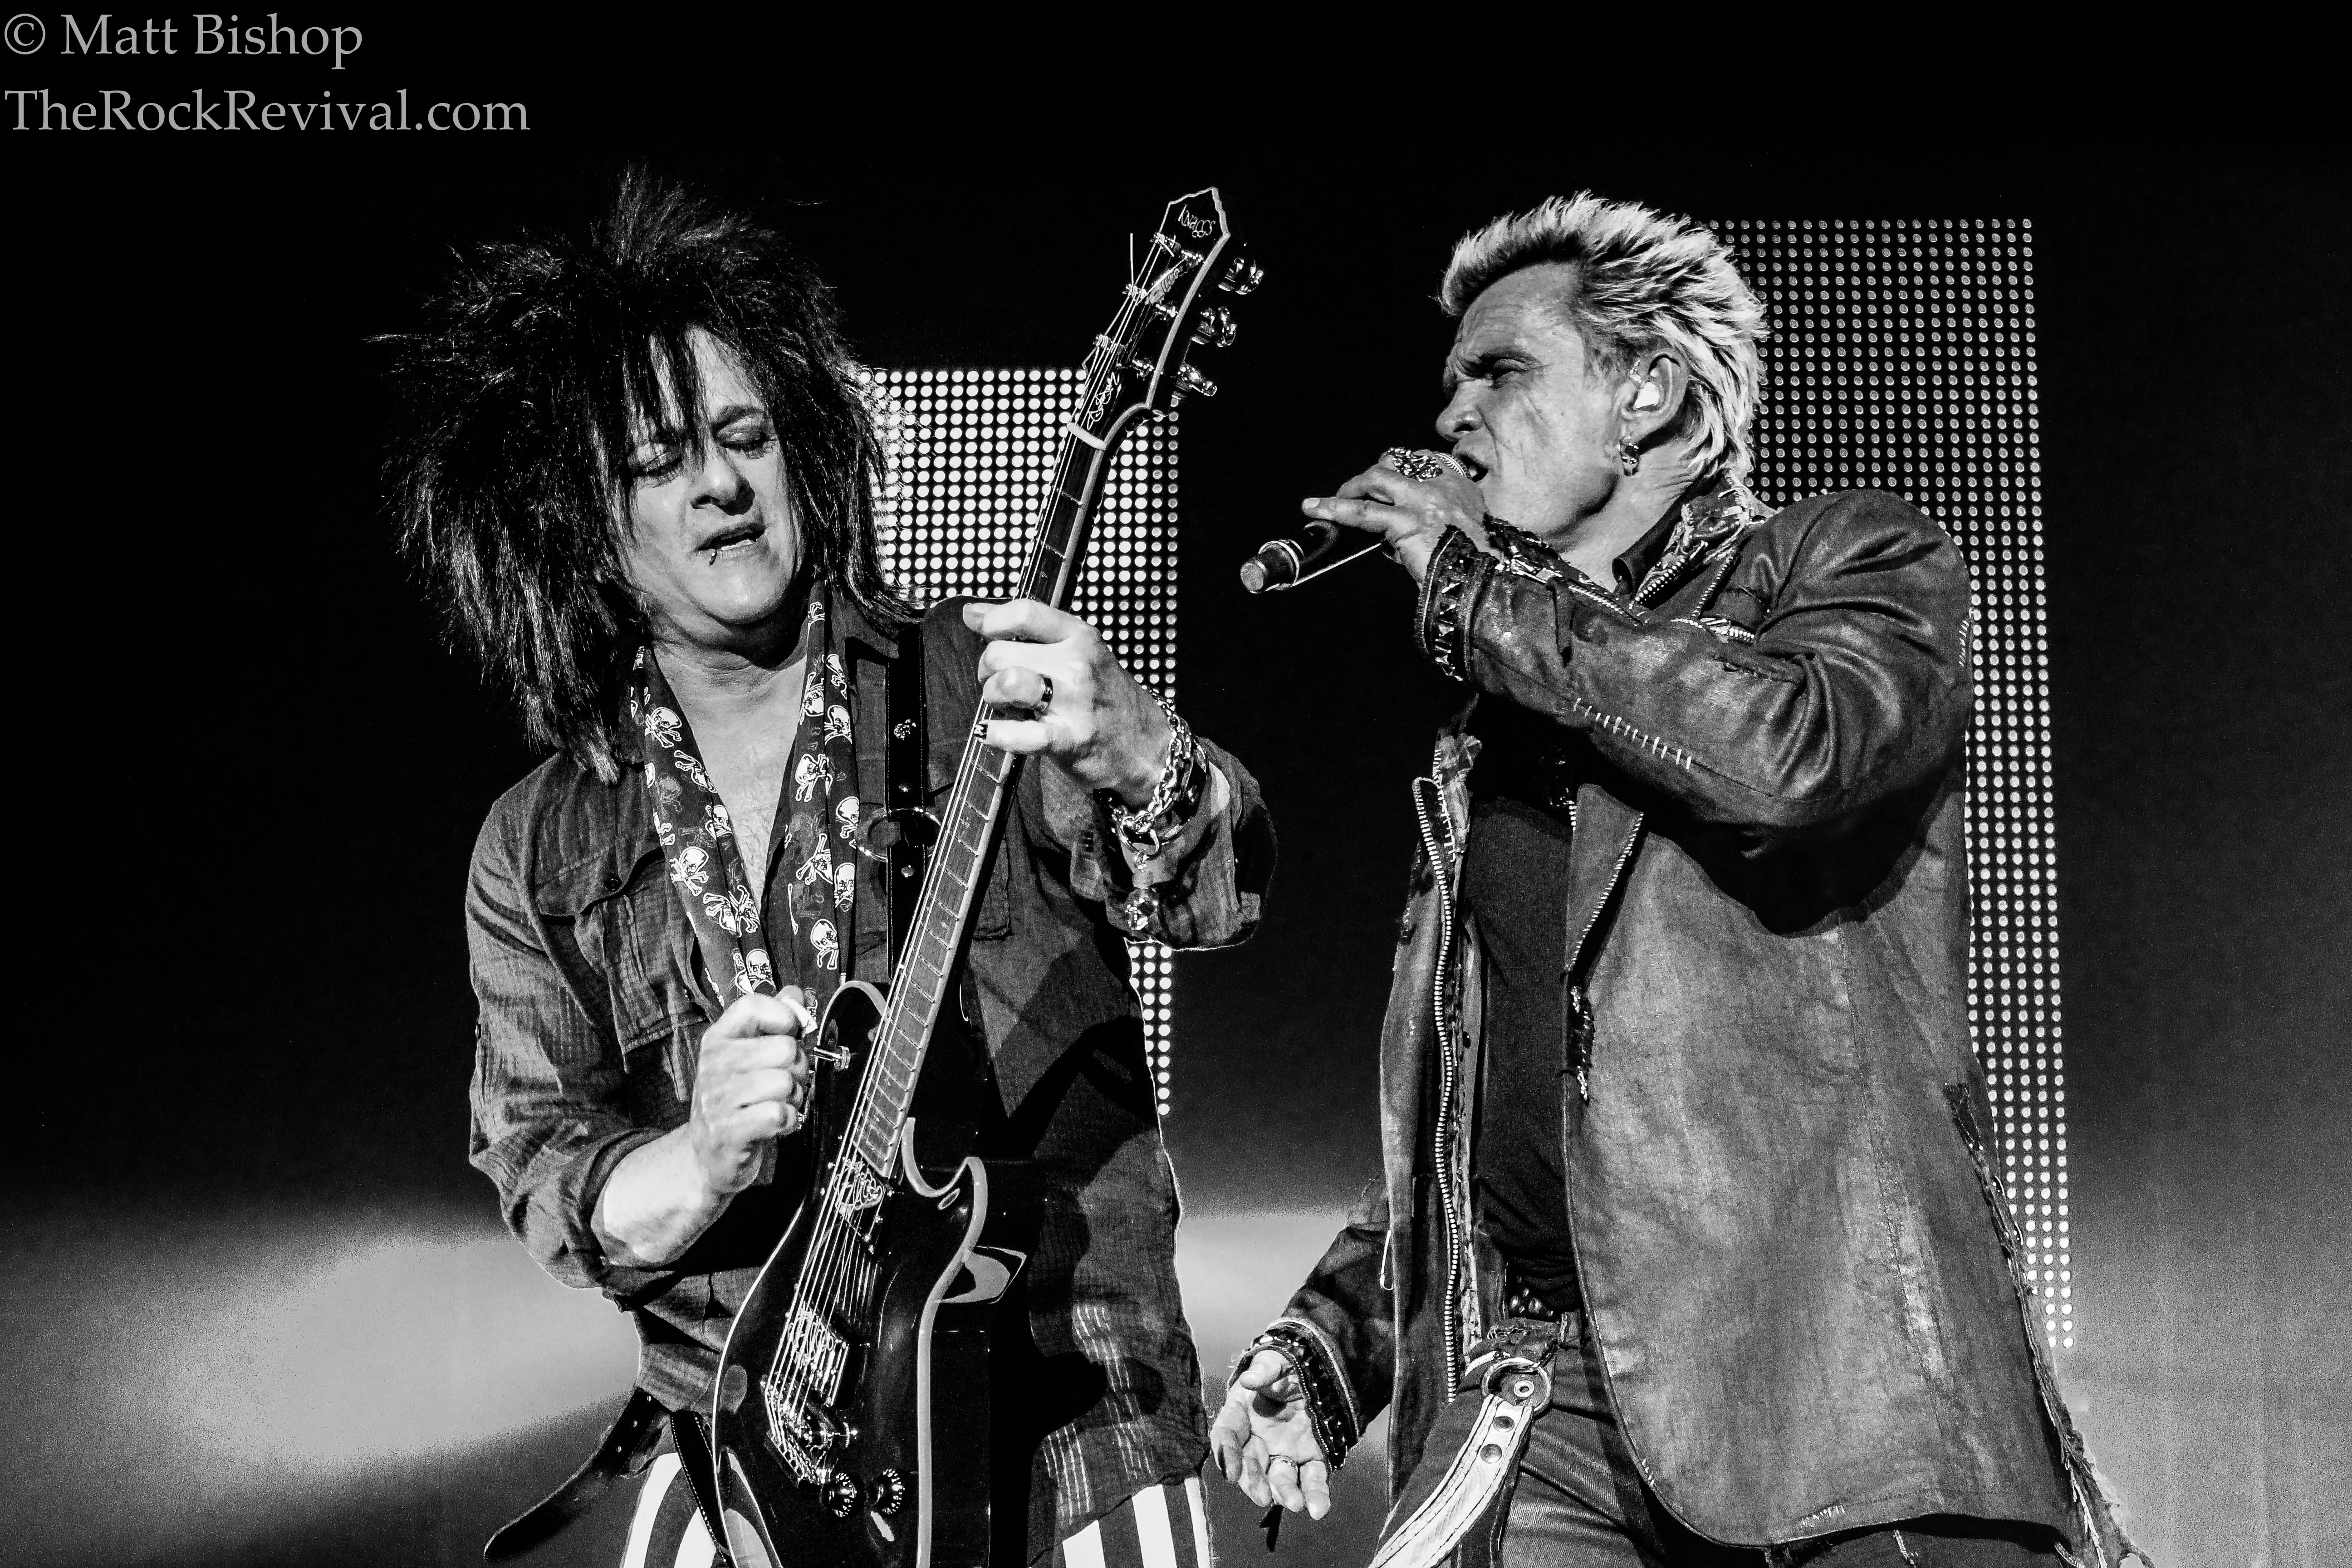 THE REBEL RIFF – A CONVERSATION WITH BILLY IDOL GUITARIST STEVE STEVENS